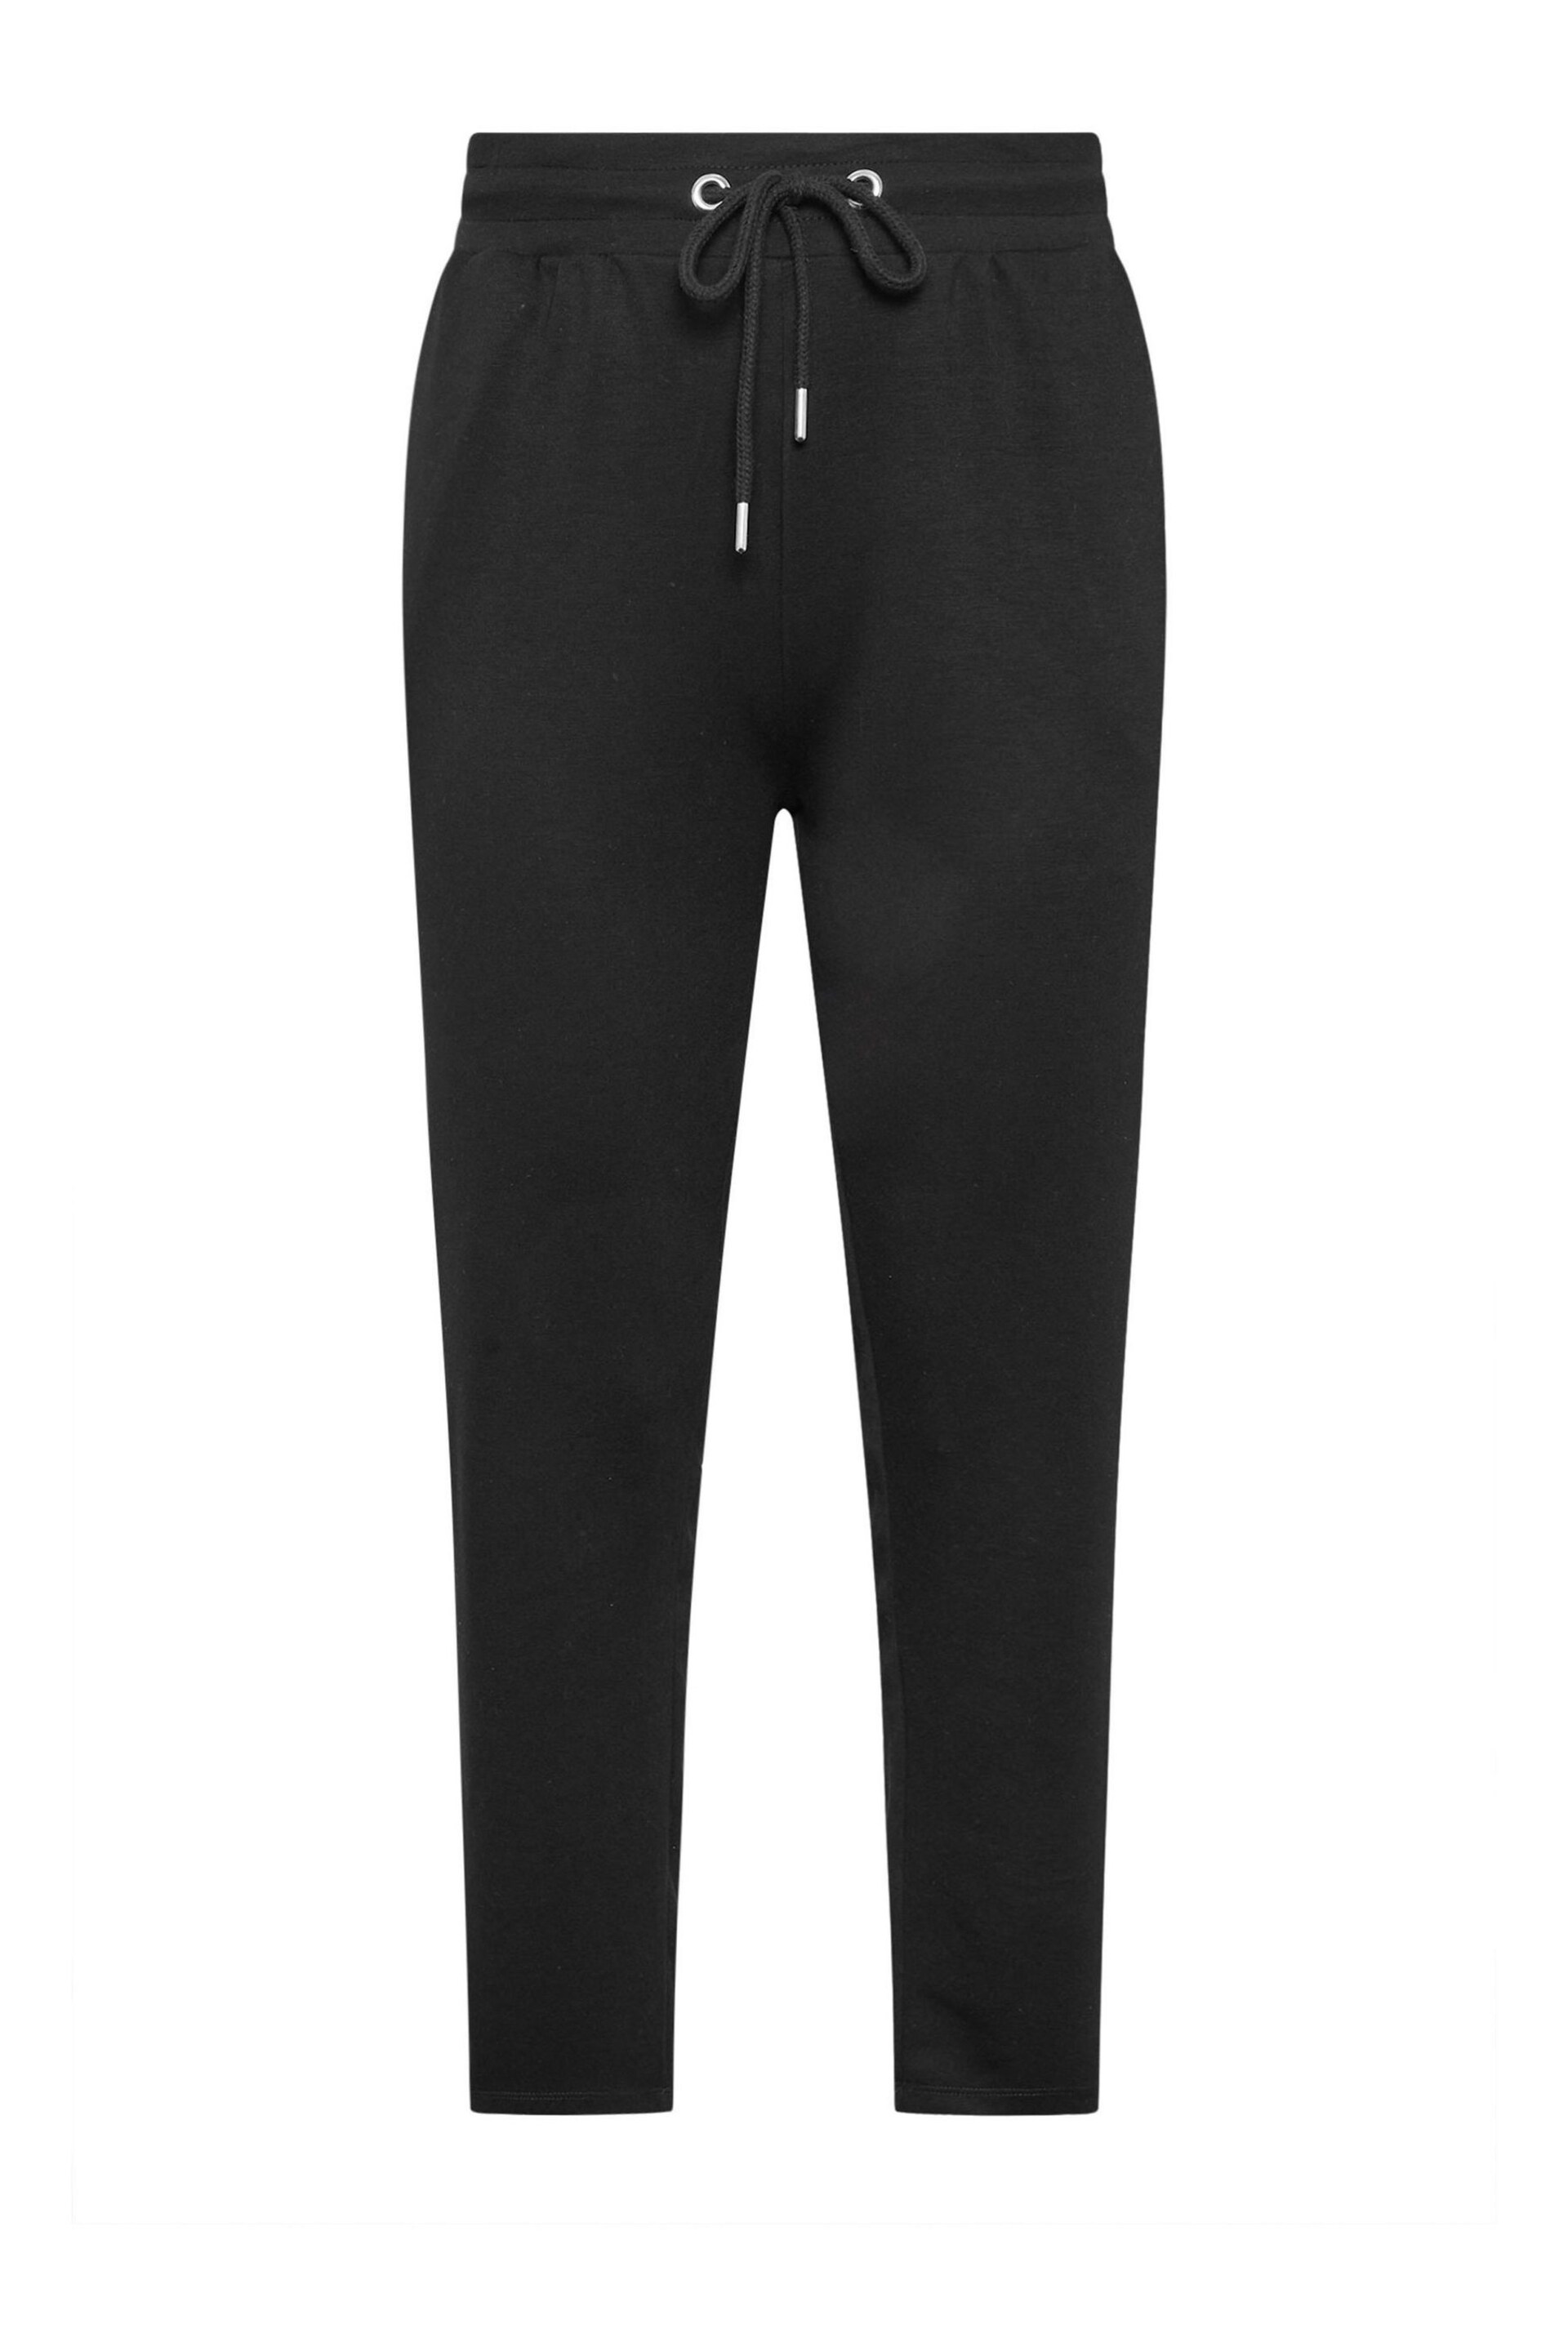 Yours Curve Black Straight Leg Stretch Joggers - Image 5 of 5